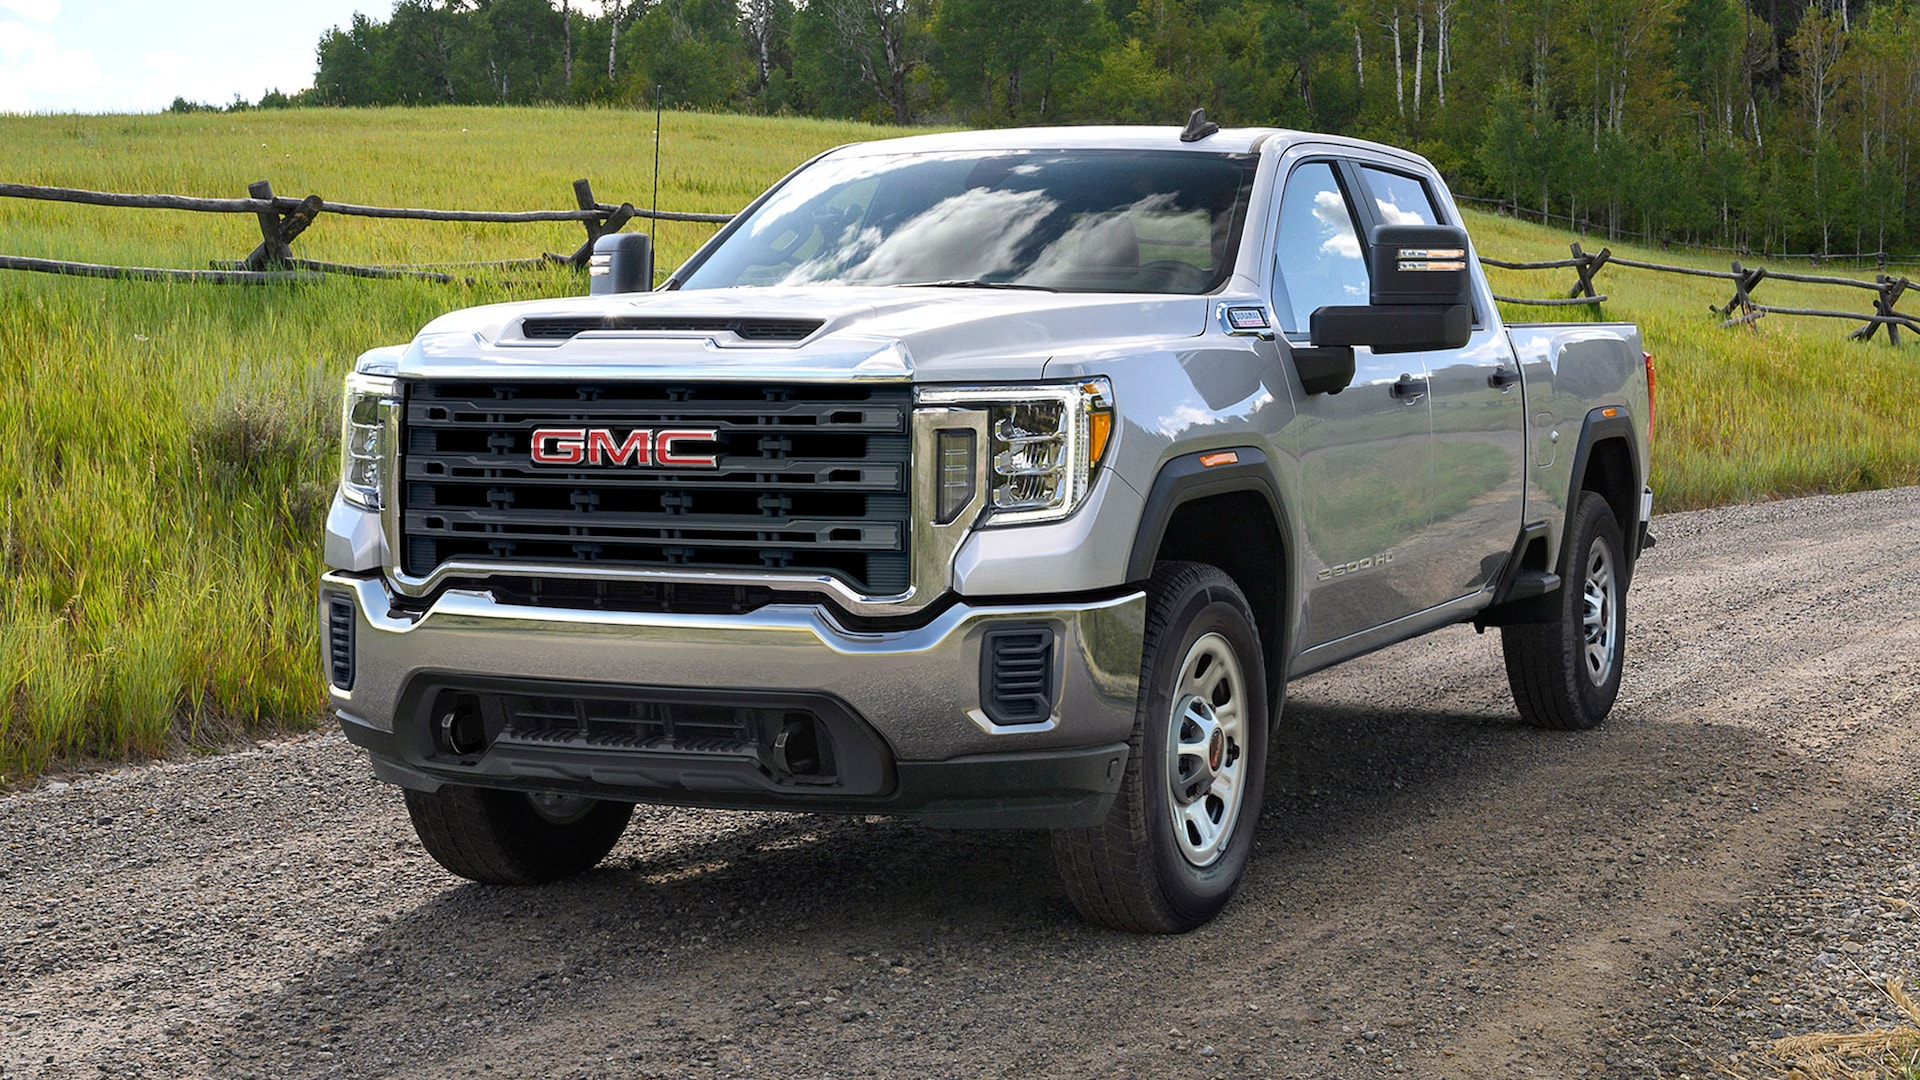 2023 GMC Sierra 2500HD Prices, Reviews, and Photos - MotorTrend